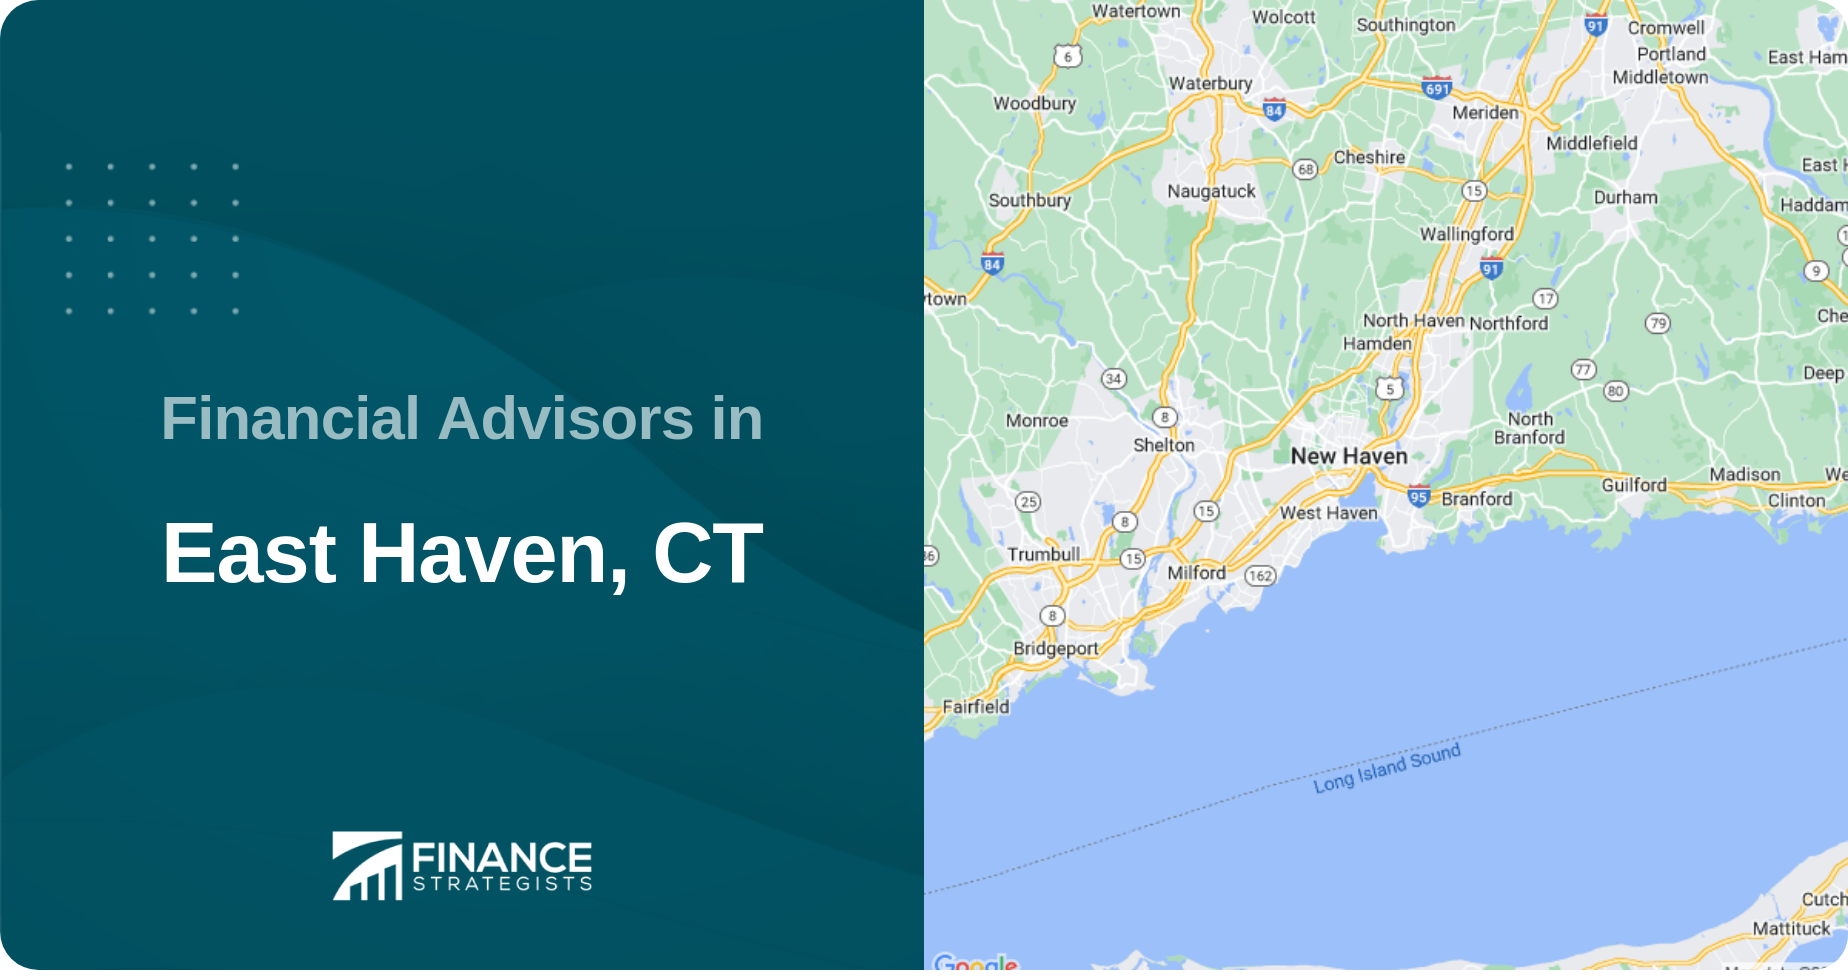 Financial Advisors in East Haven, CT